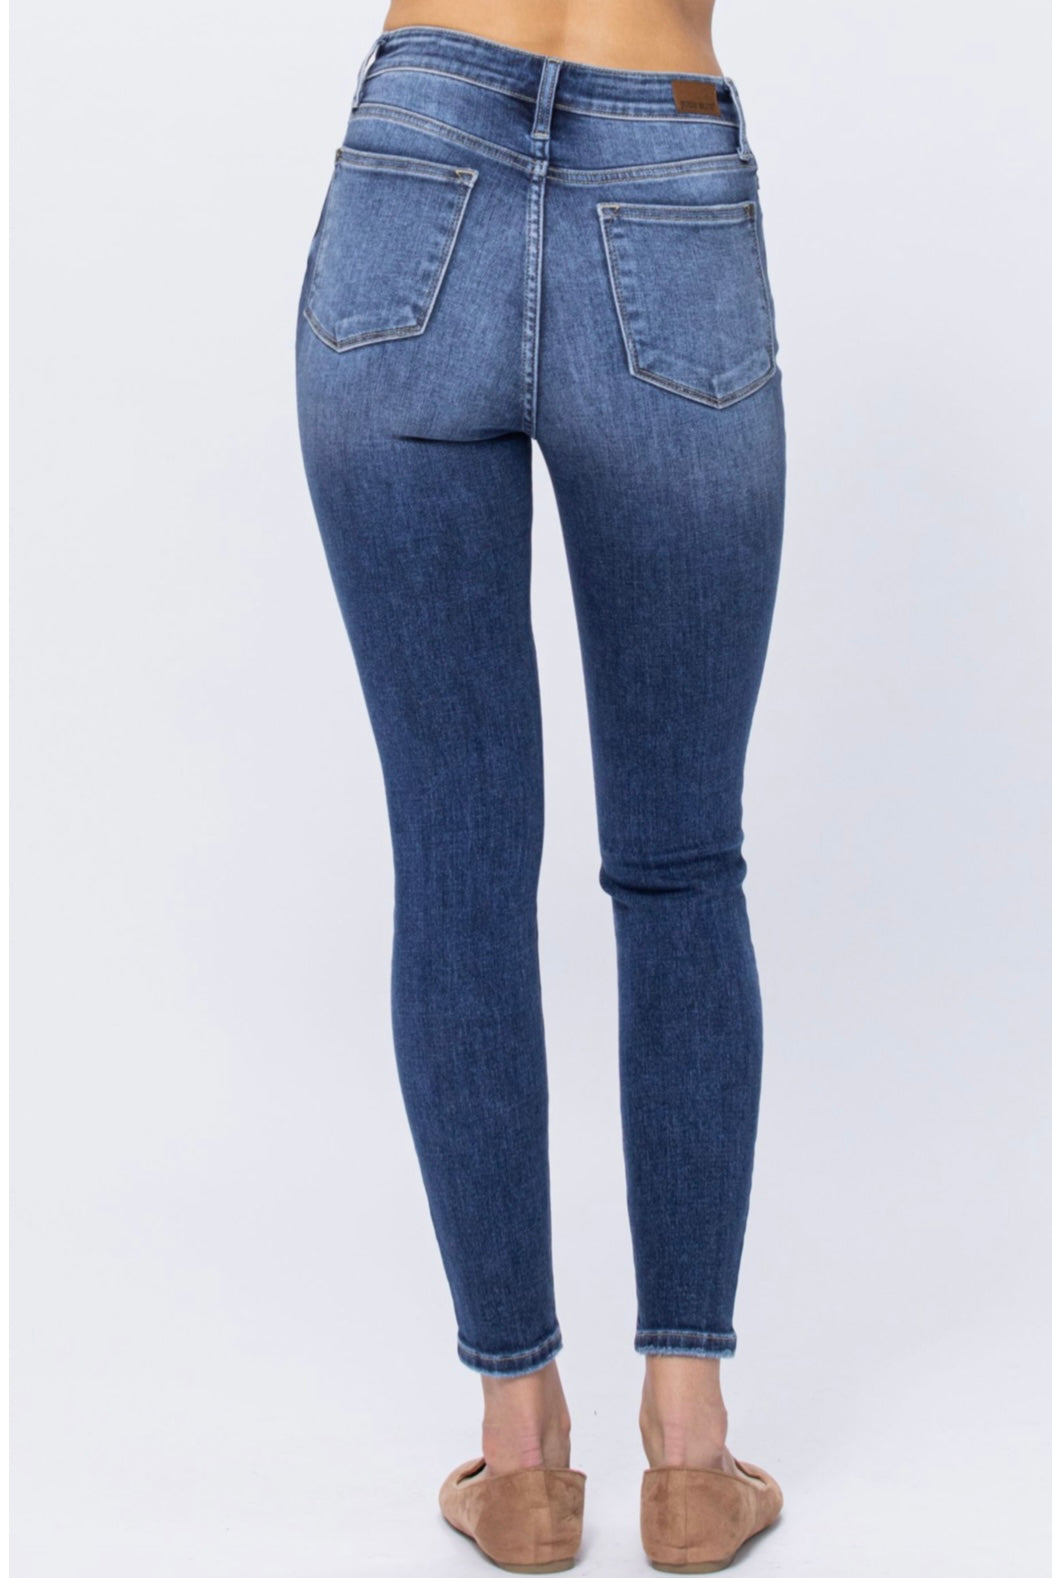 Judy Blues - High Rise 5 Button Skinny